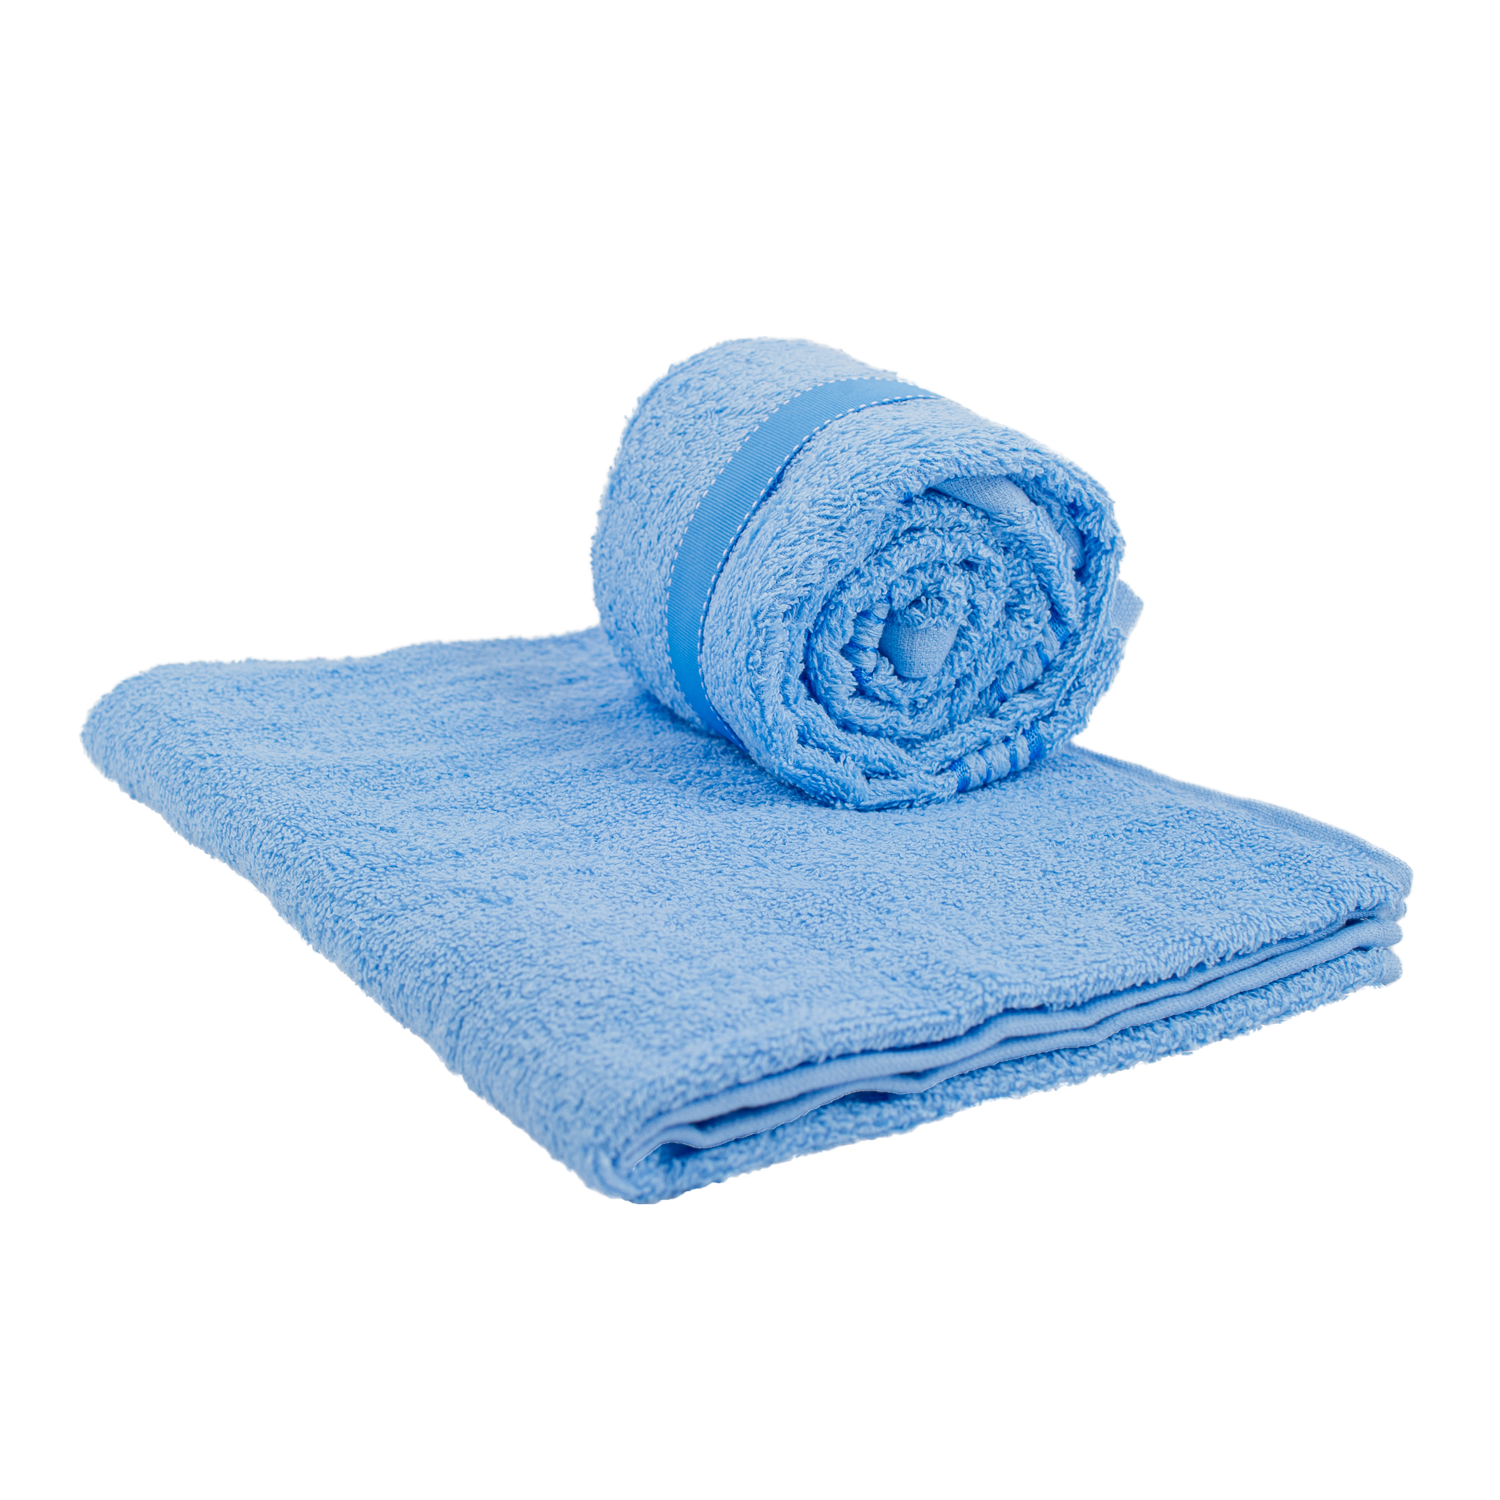 Blue Towel Gift Items & Supplies